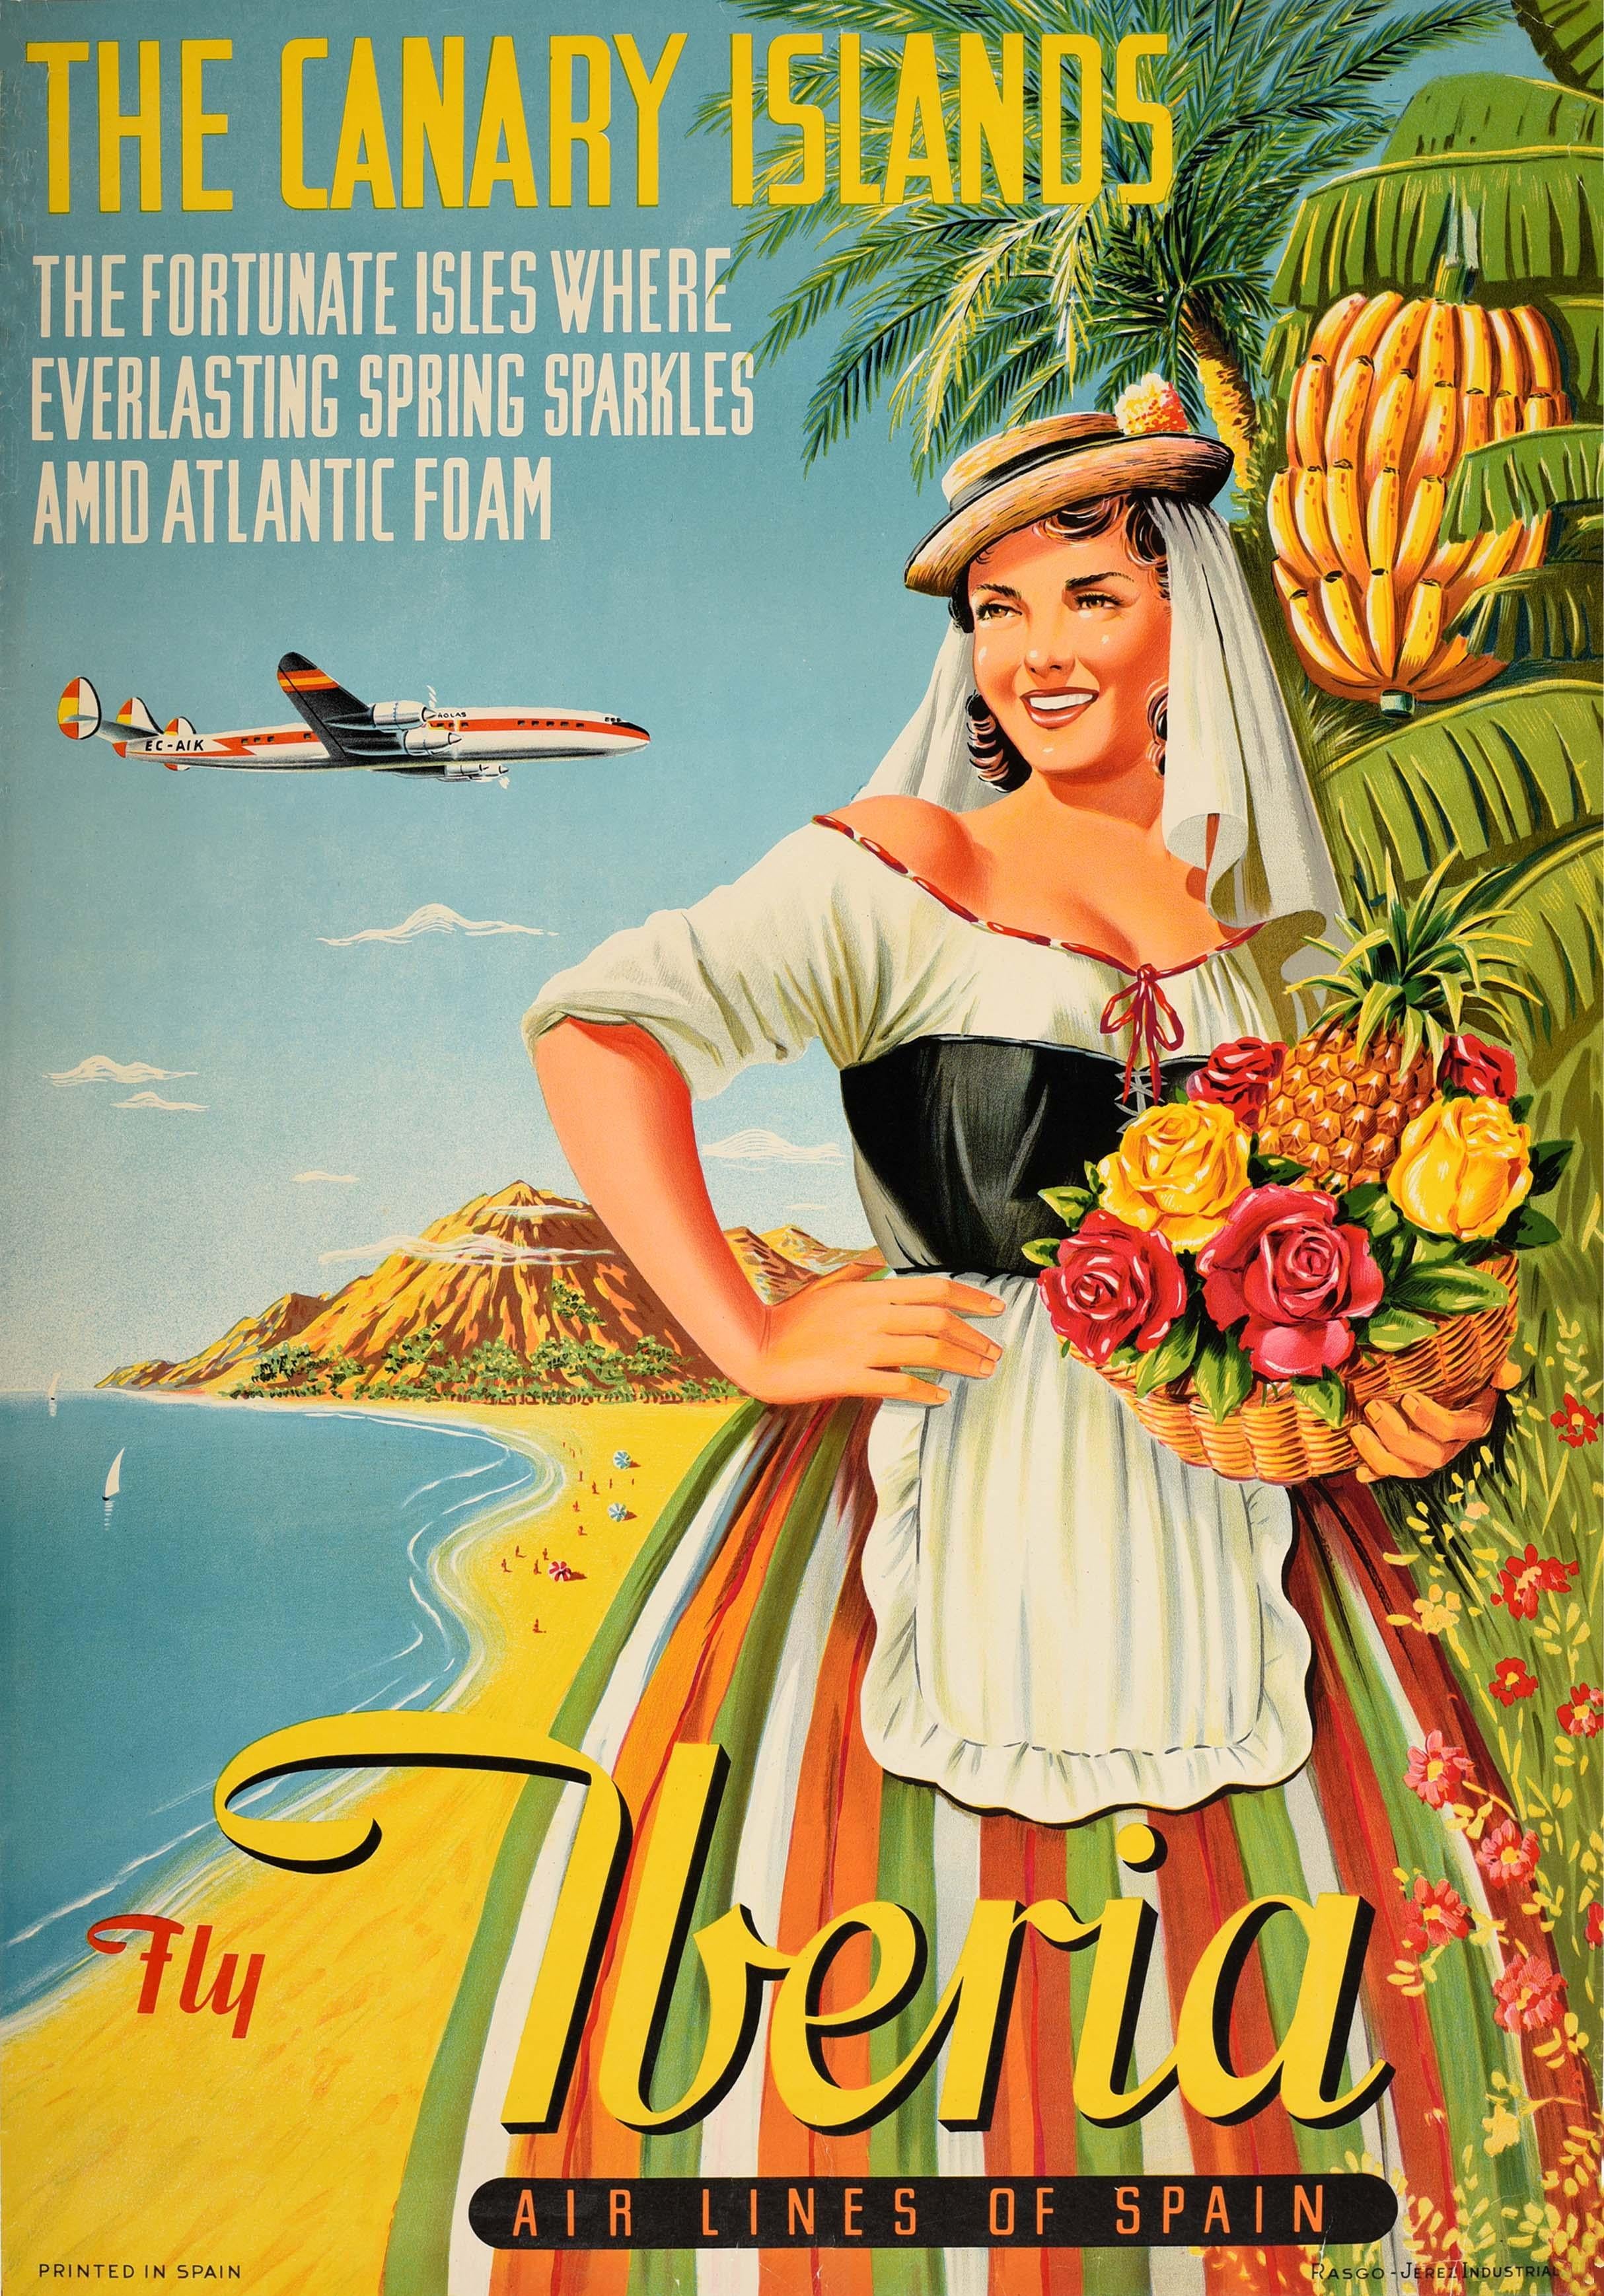 Unknown Print - Original Vintage Poster Canary Islands Fly Iberia Airlines Spain Holiday Travel